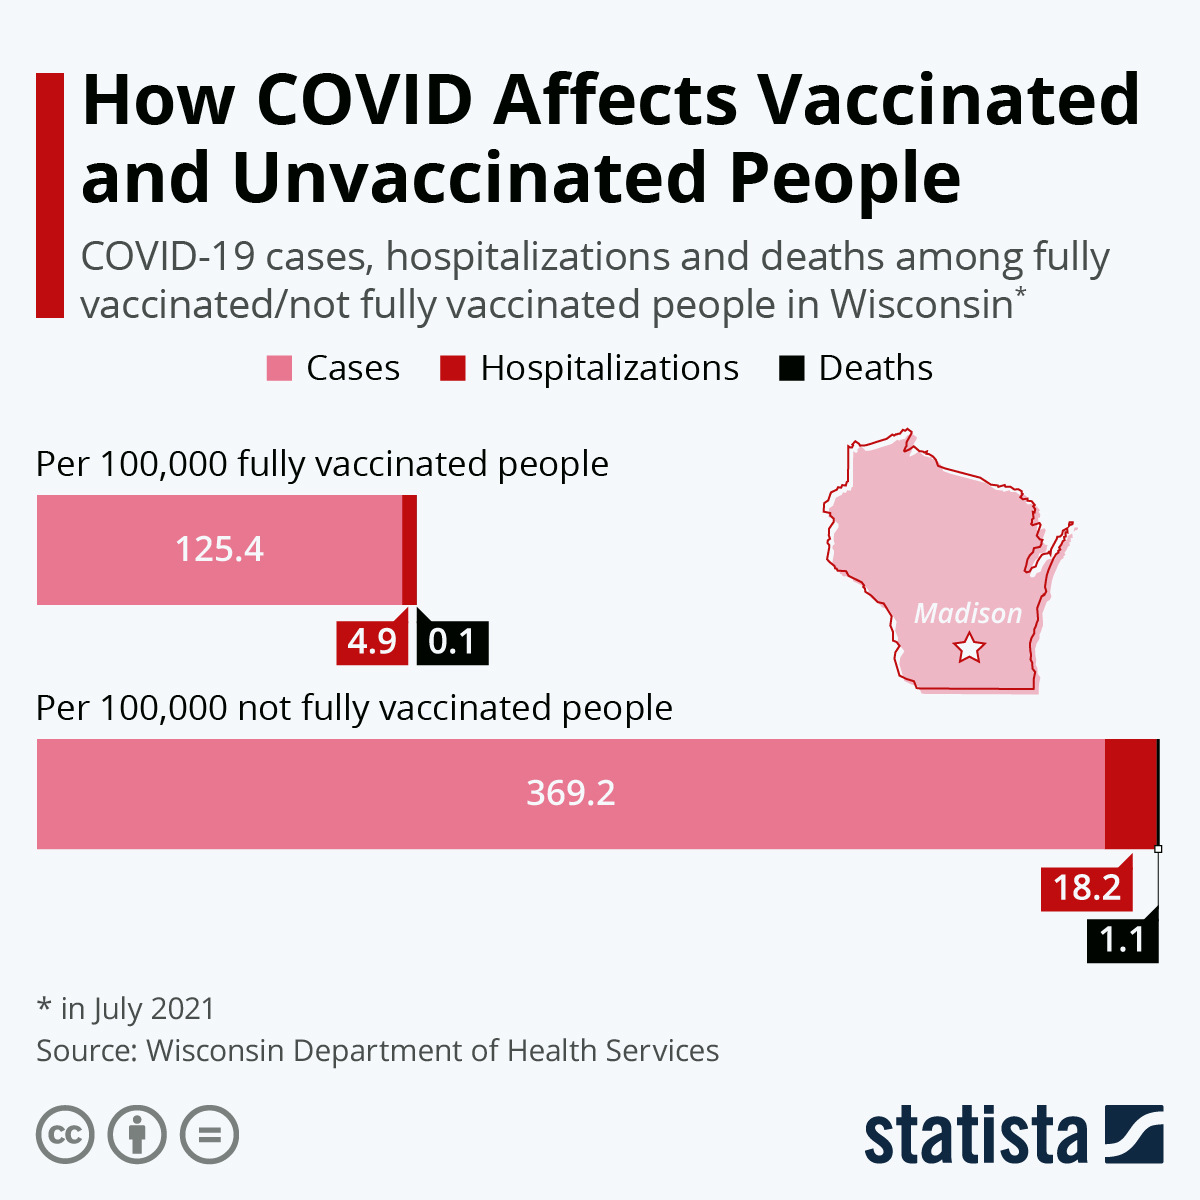 How COVID Affects Vaccinated and Unvaccinated People